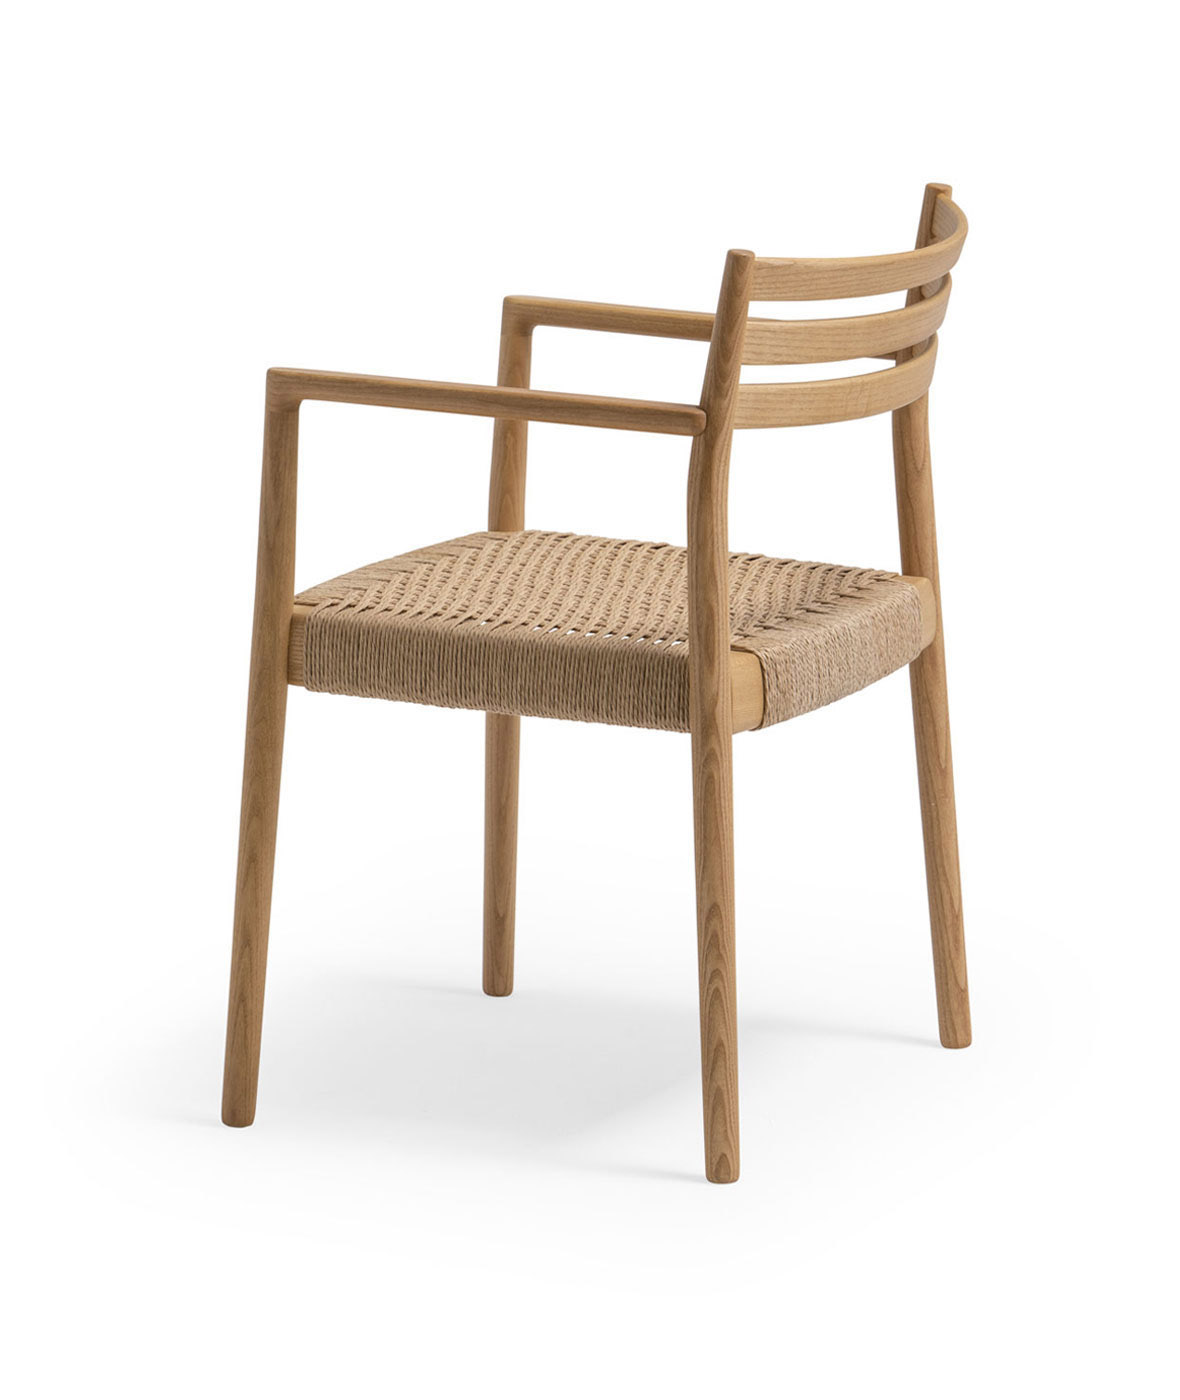 Bogart chair with armrests and braided rope seat - Vergés